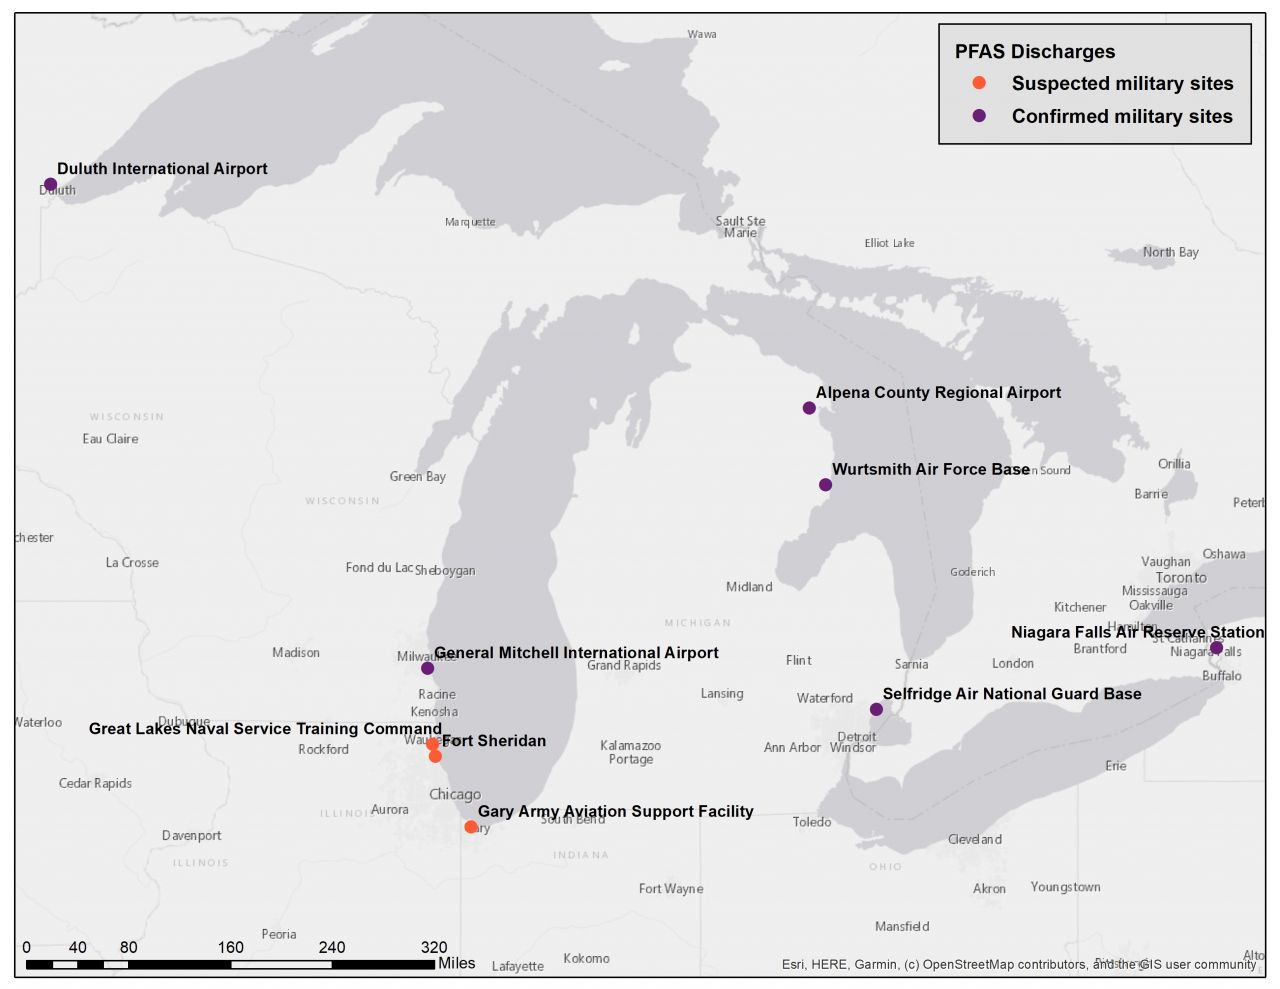 Suspected PFAS sites along the Great Lakes